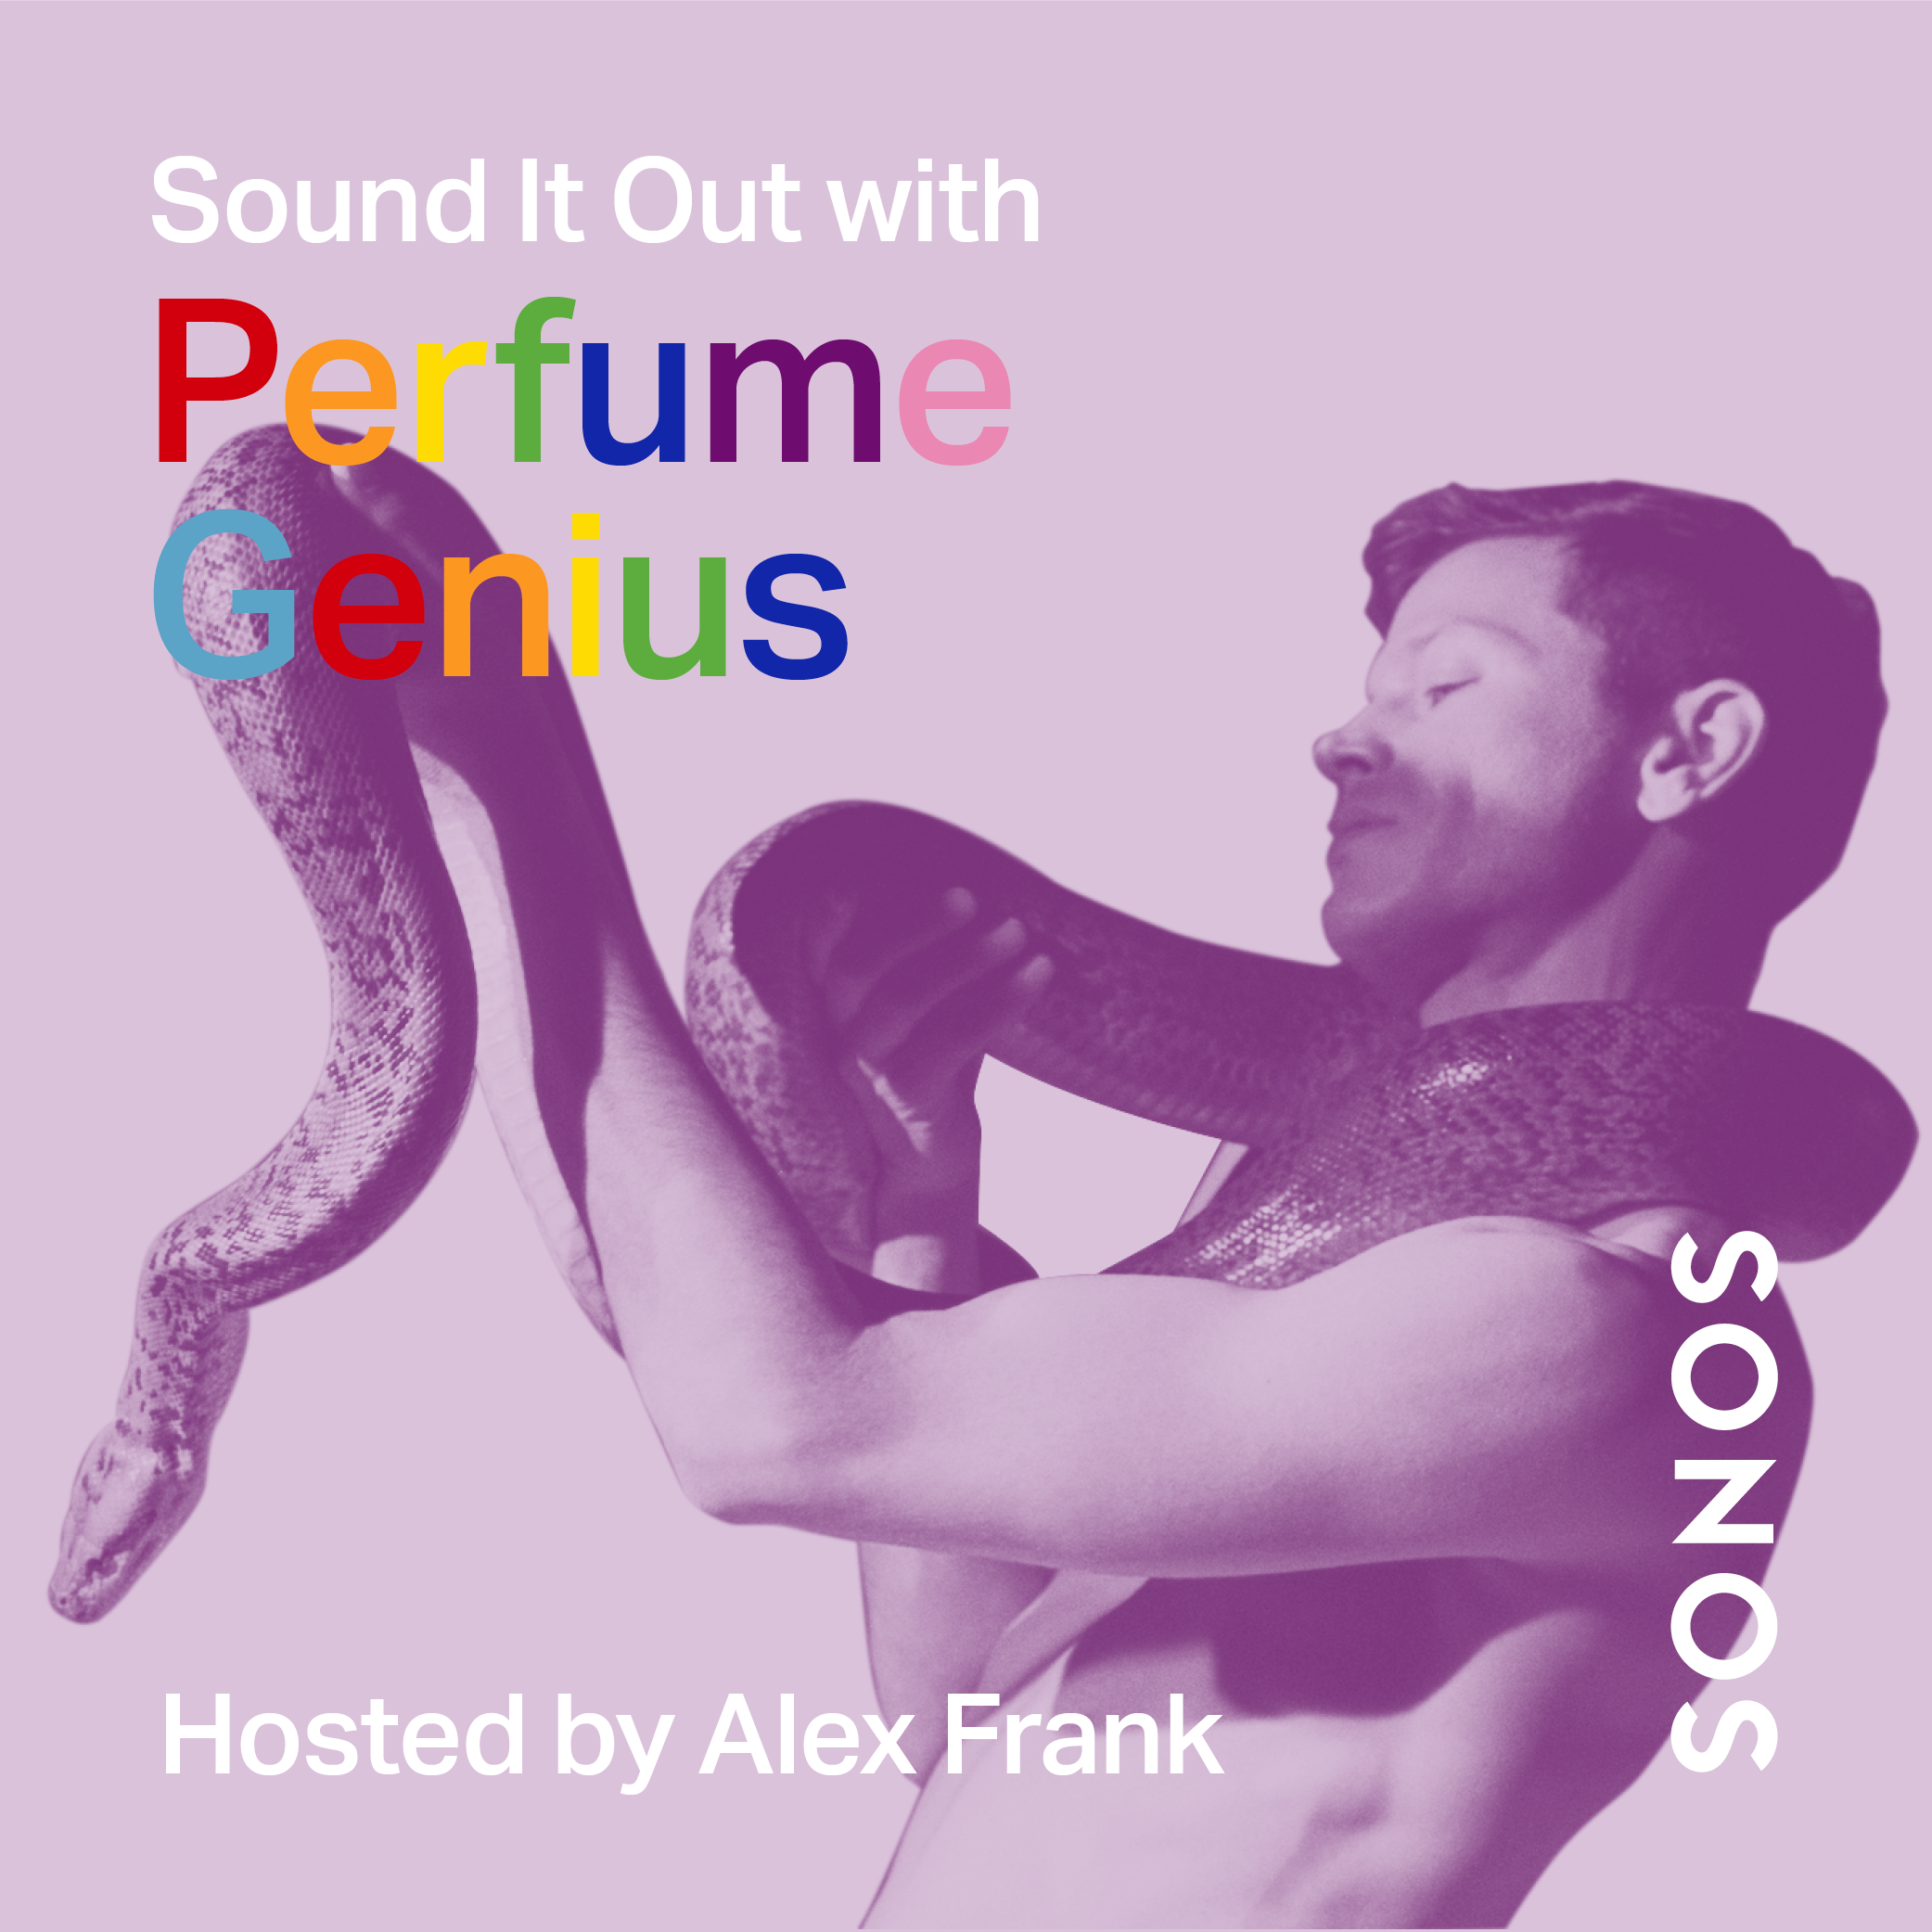 <a href="https://www.mixcloud.com/sonos/sound-it-out-with-perfume-genius/" target="_blank">SONOS RADIO</a>